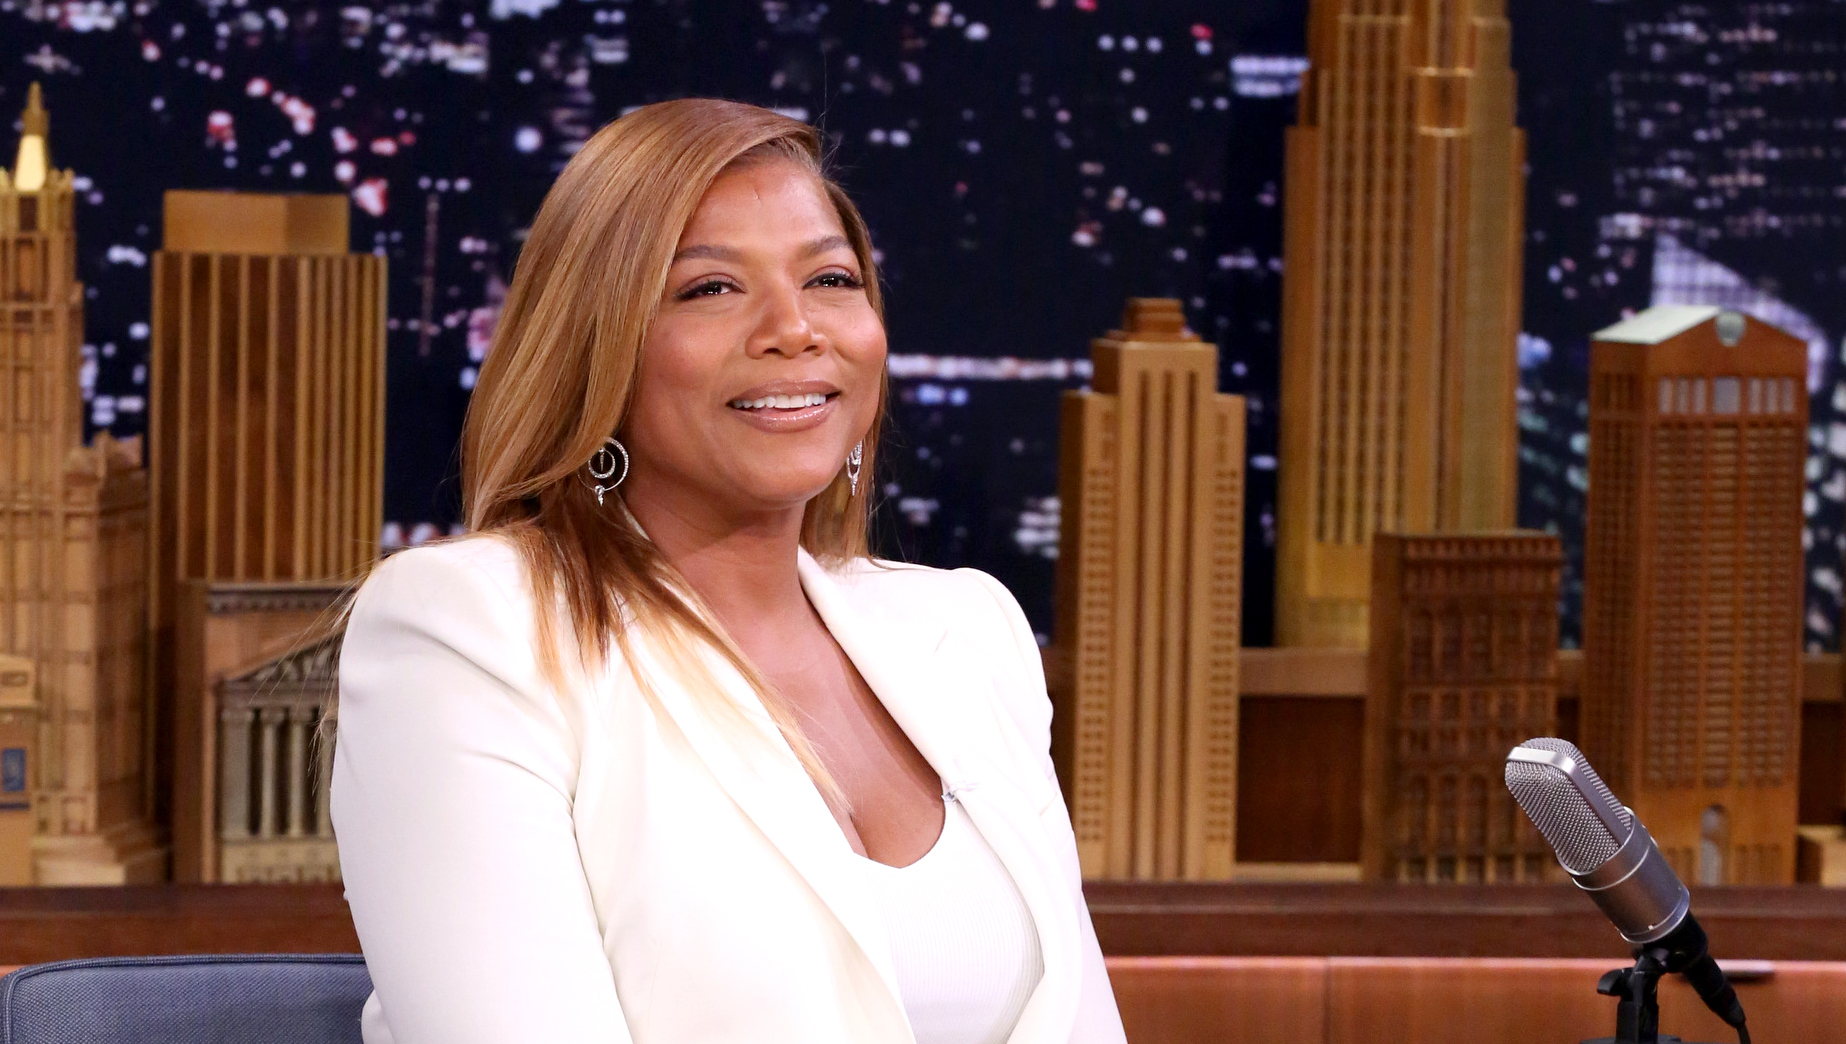 Queen Latifah Flaunts Significant Weight Loss, Looks Better Than Ever